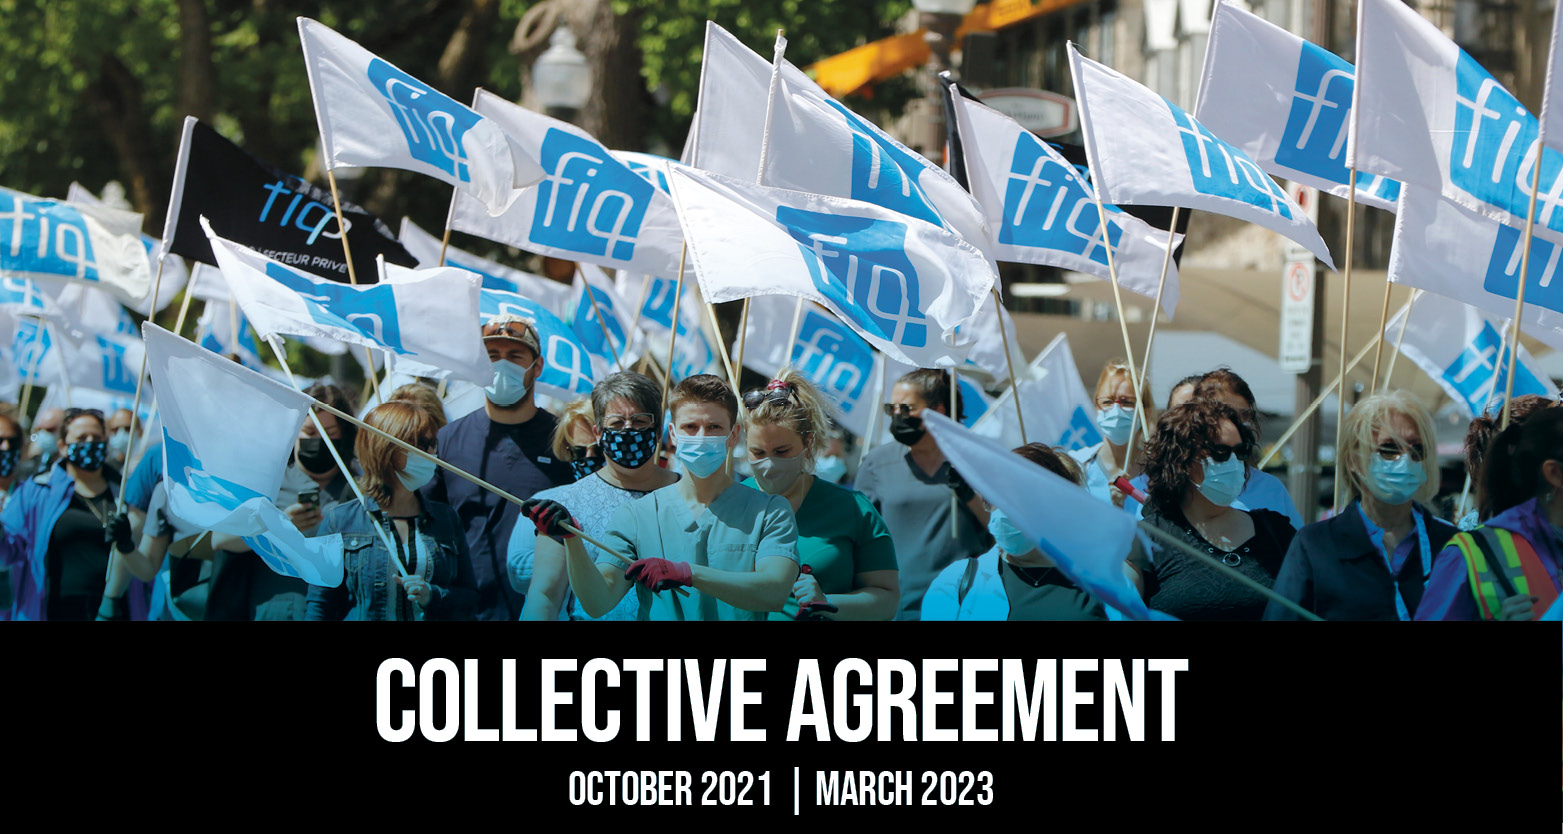 The 2021-2023 collective agreement is signed